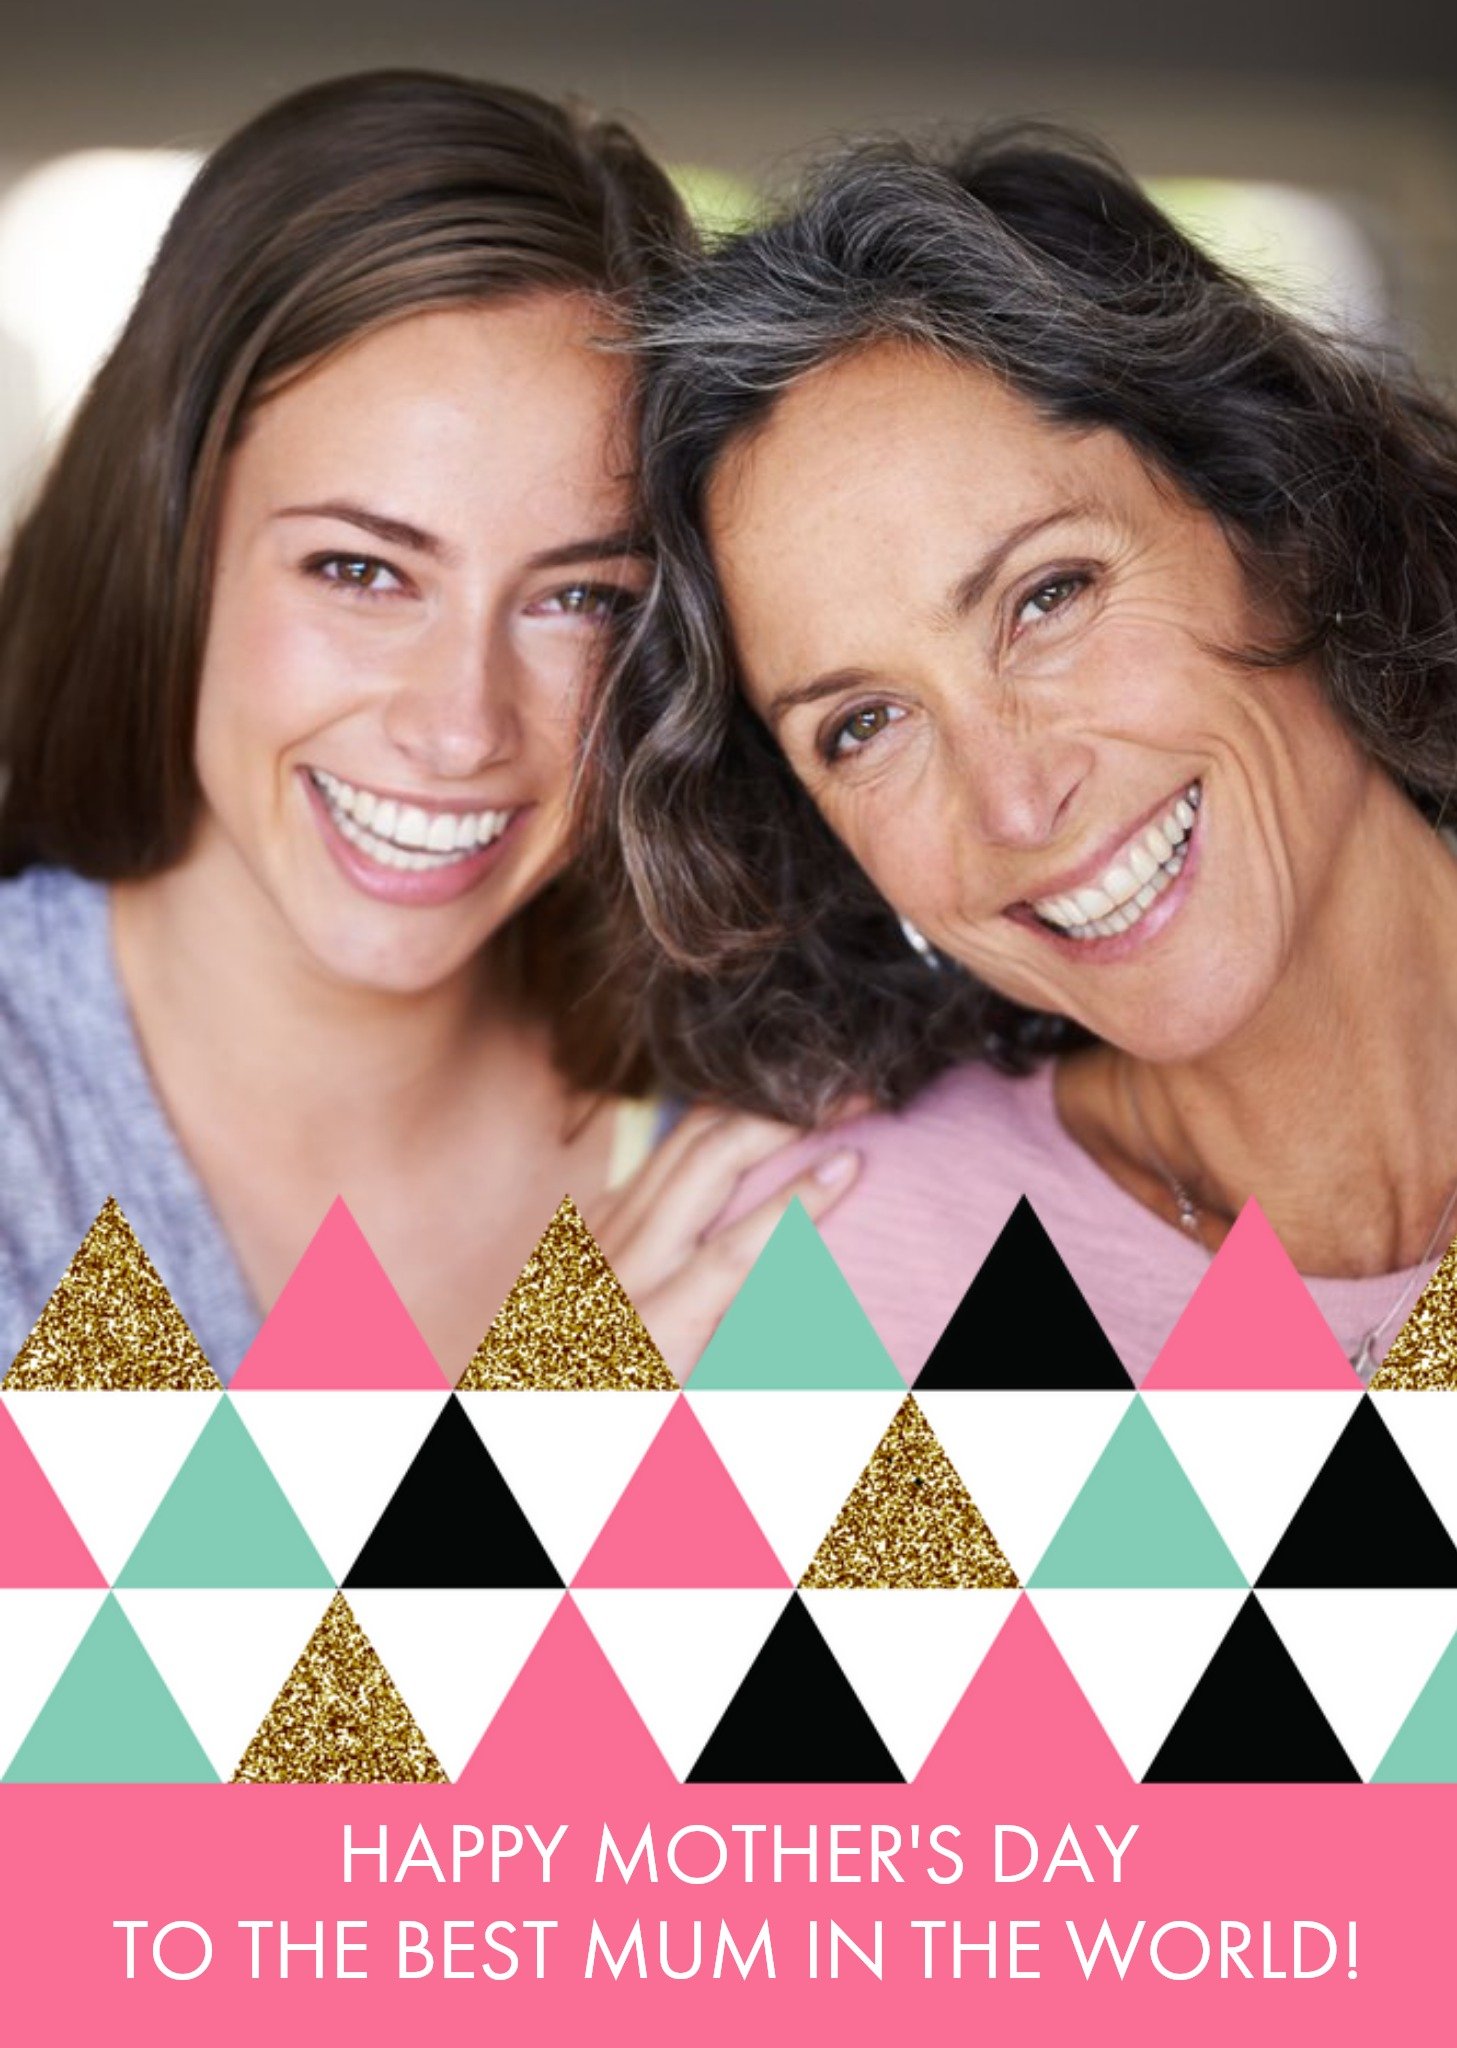 Moonpig Pink And Metallic Gold Triangles Happy Mother's Day Photo Card, Large